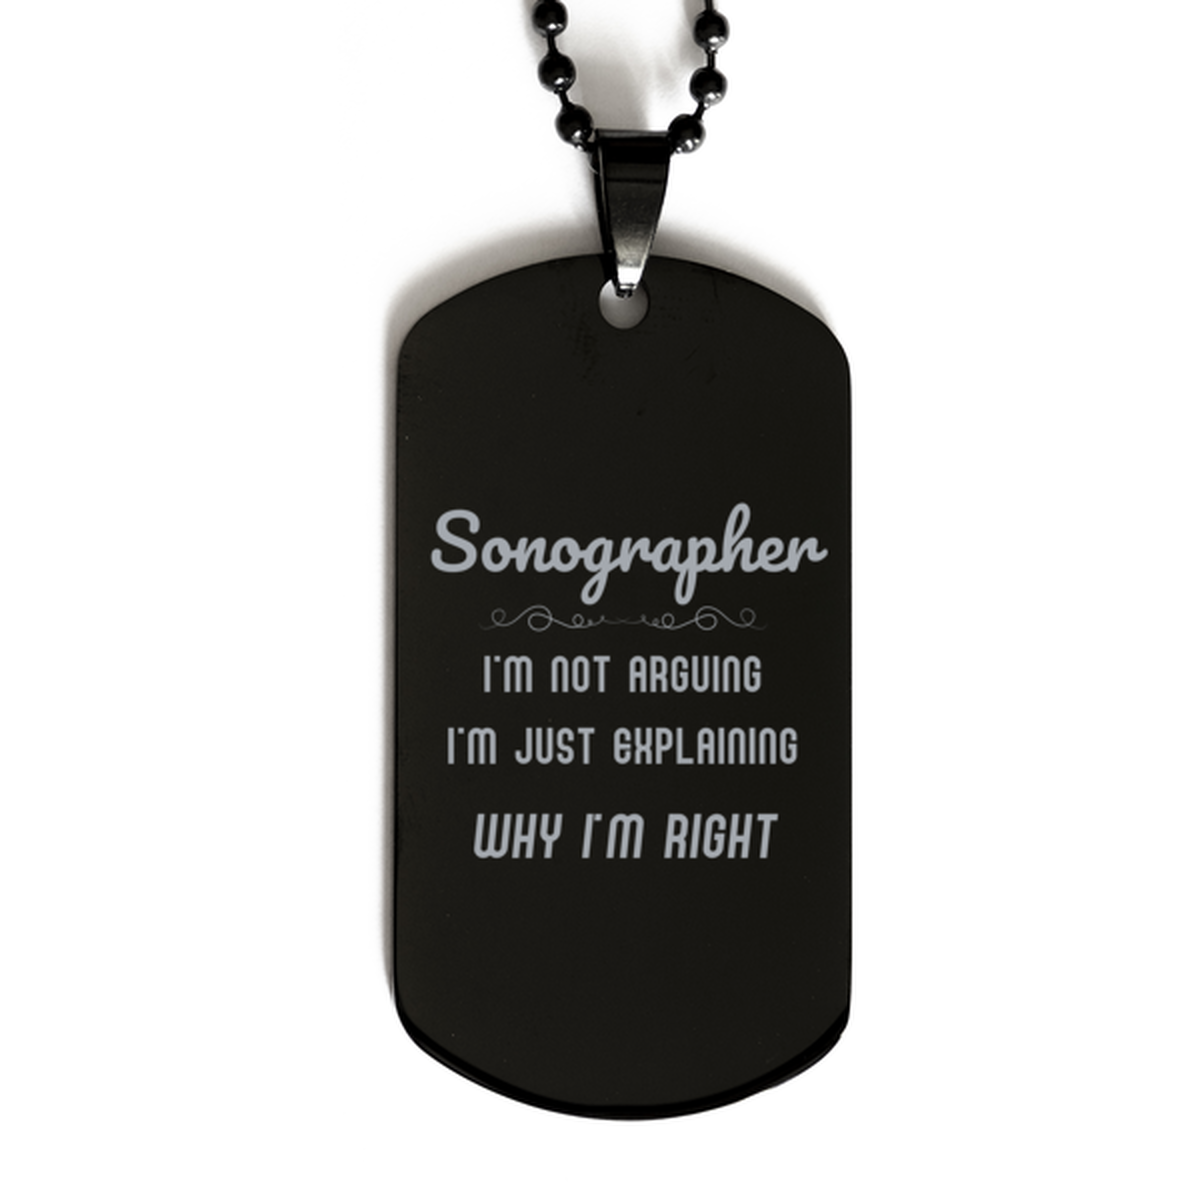 Sonographer I'm not Arguing. I'm Just Explaining Why I'm RIGHT Black Dog Tag, Funny Saying Quote Sonographer Gifts For Sonographer Graduation Birthday Christmas Gifts for Men Women Coworker